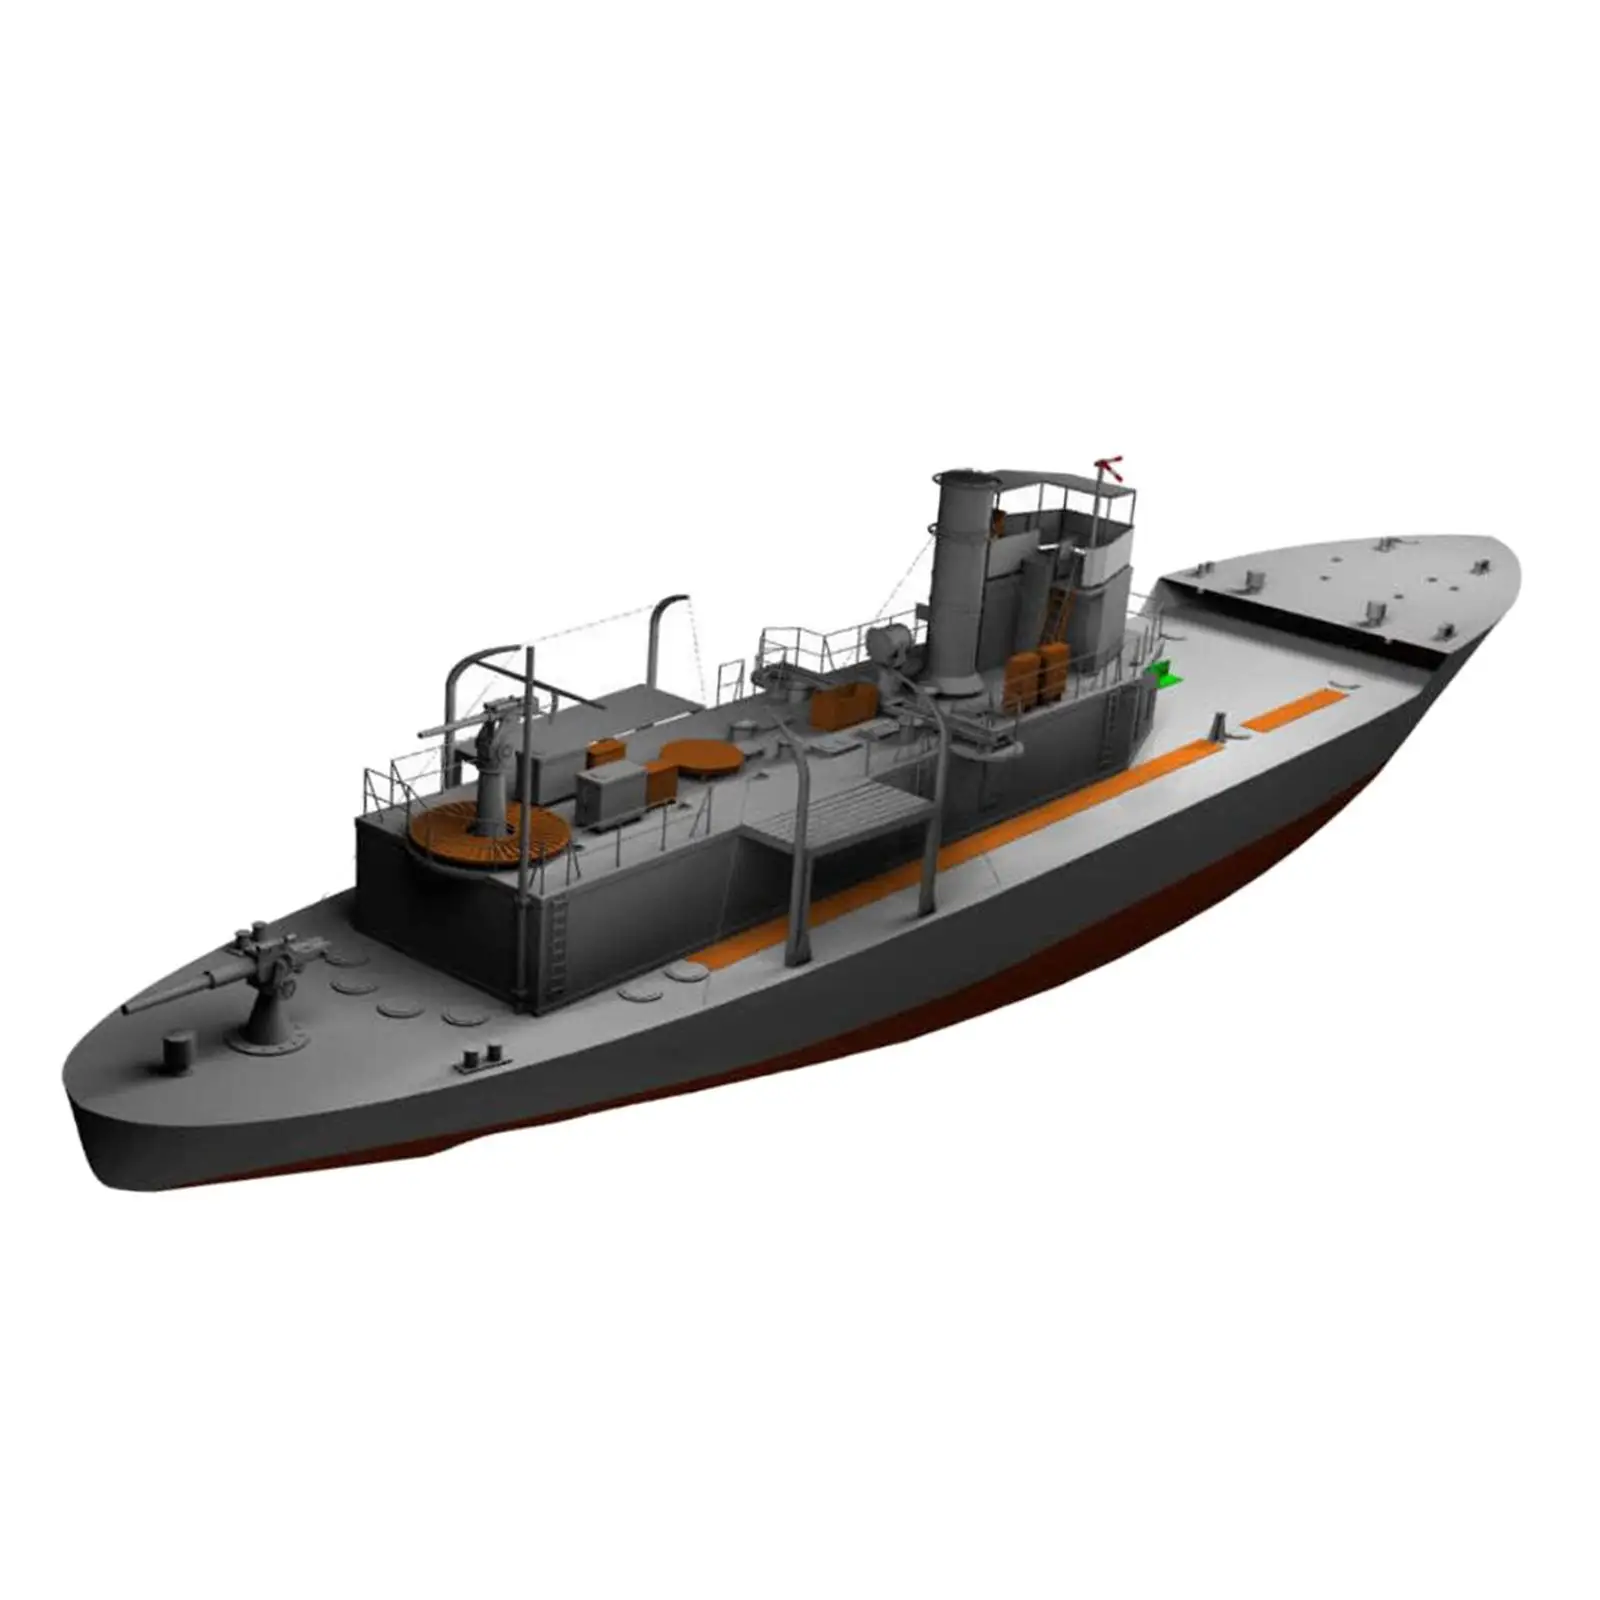 Patrol Boat Kits Brain Teaser Puzzle Paper DIY Toy Papercraft 1/100 DIY Paper Ship for Children Home Decoration Boys Adults Kids